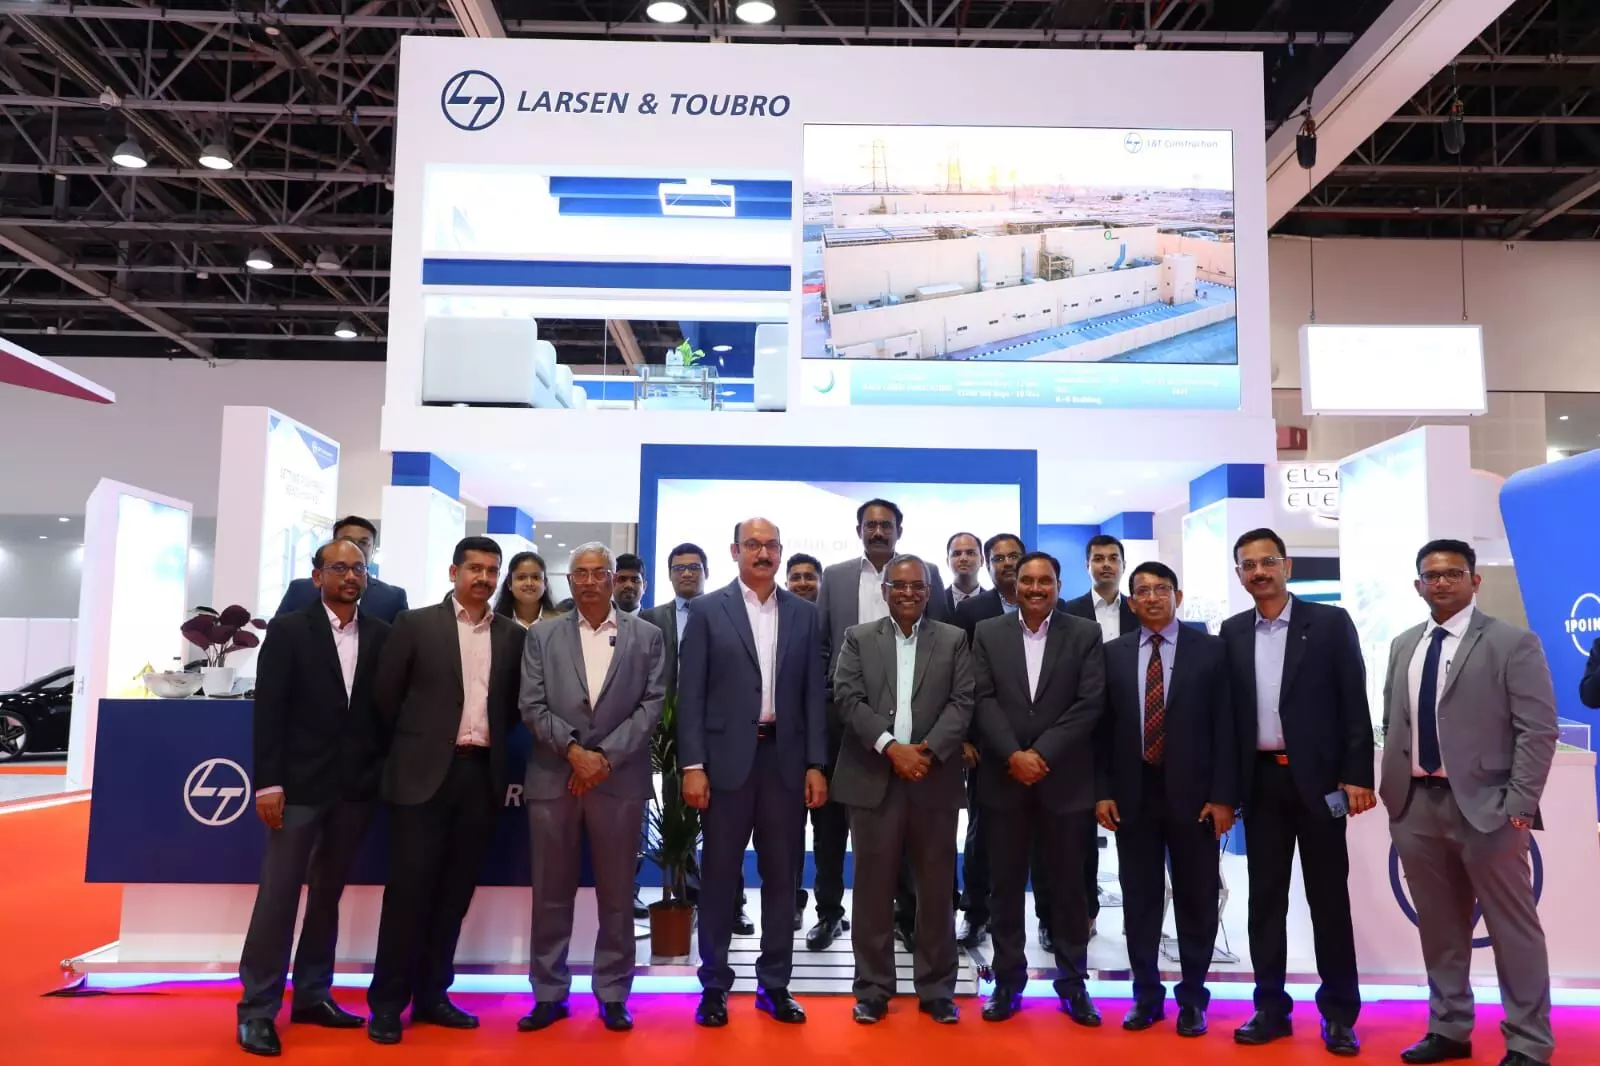 L&T to showcase capabilities in powering nations & building defining water infra at WETEX Dubai